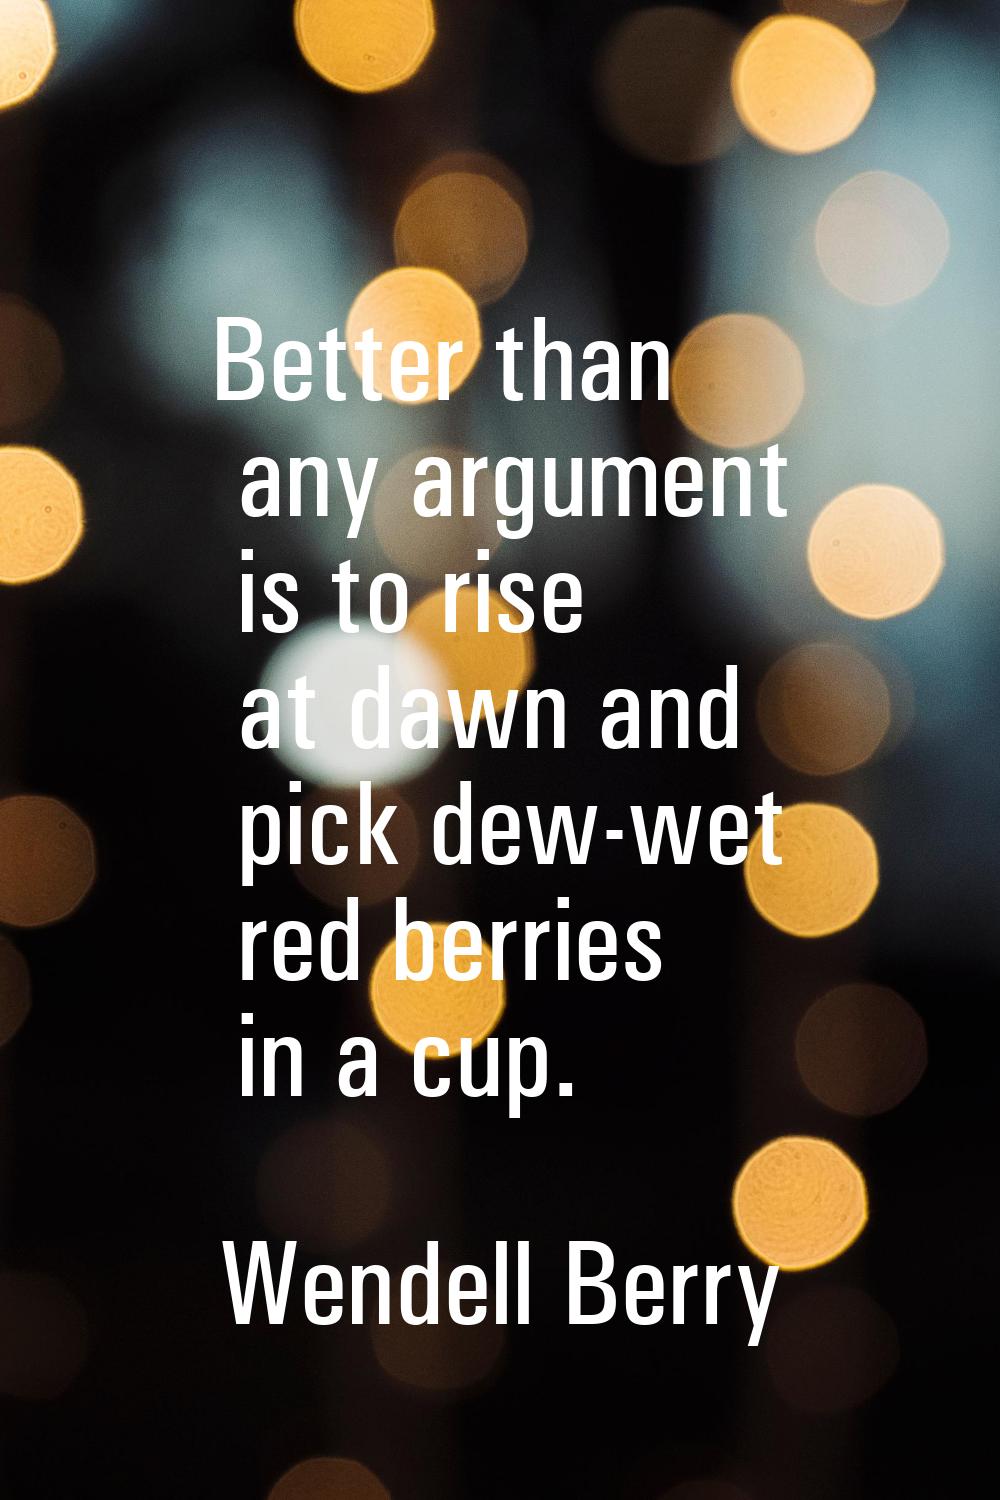 Better than any argument is to rise at dawn and pick dew-wet red berries in a cup.